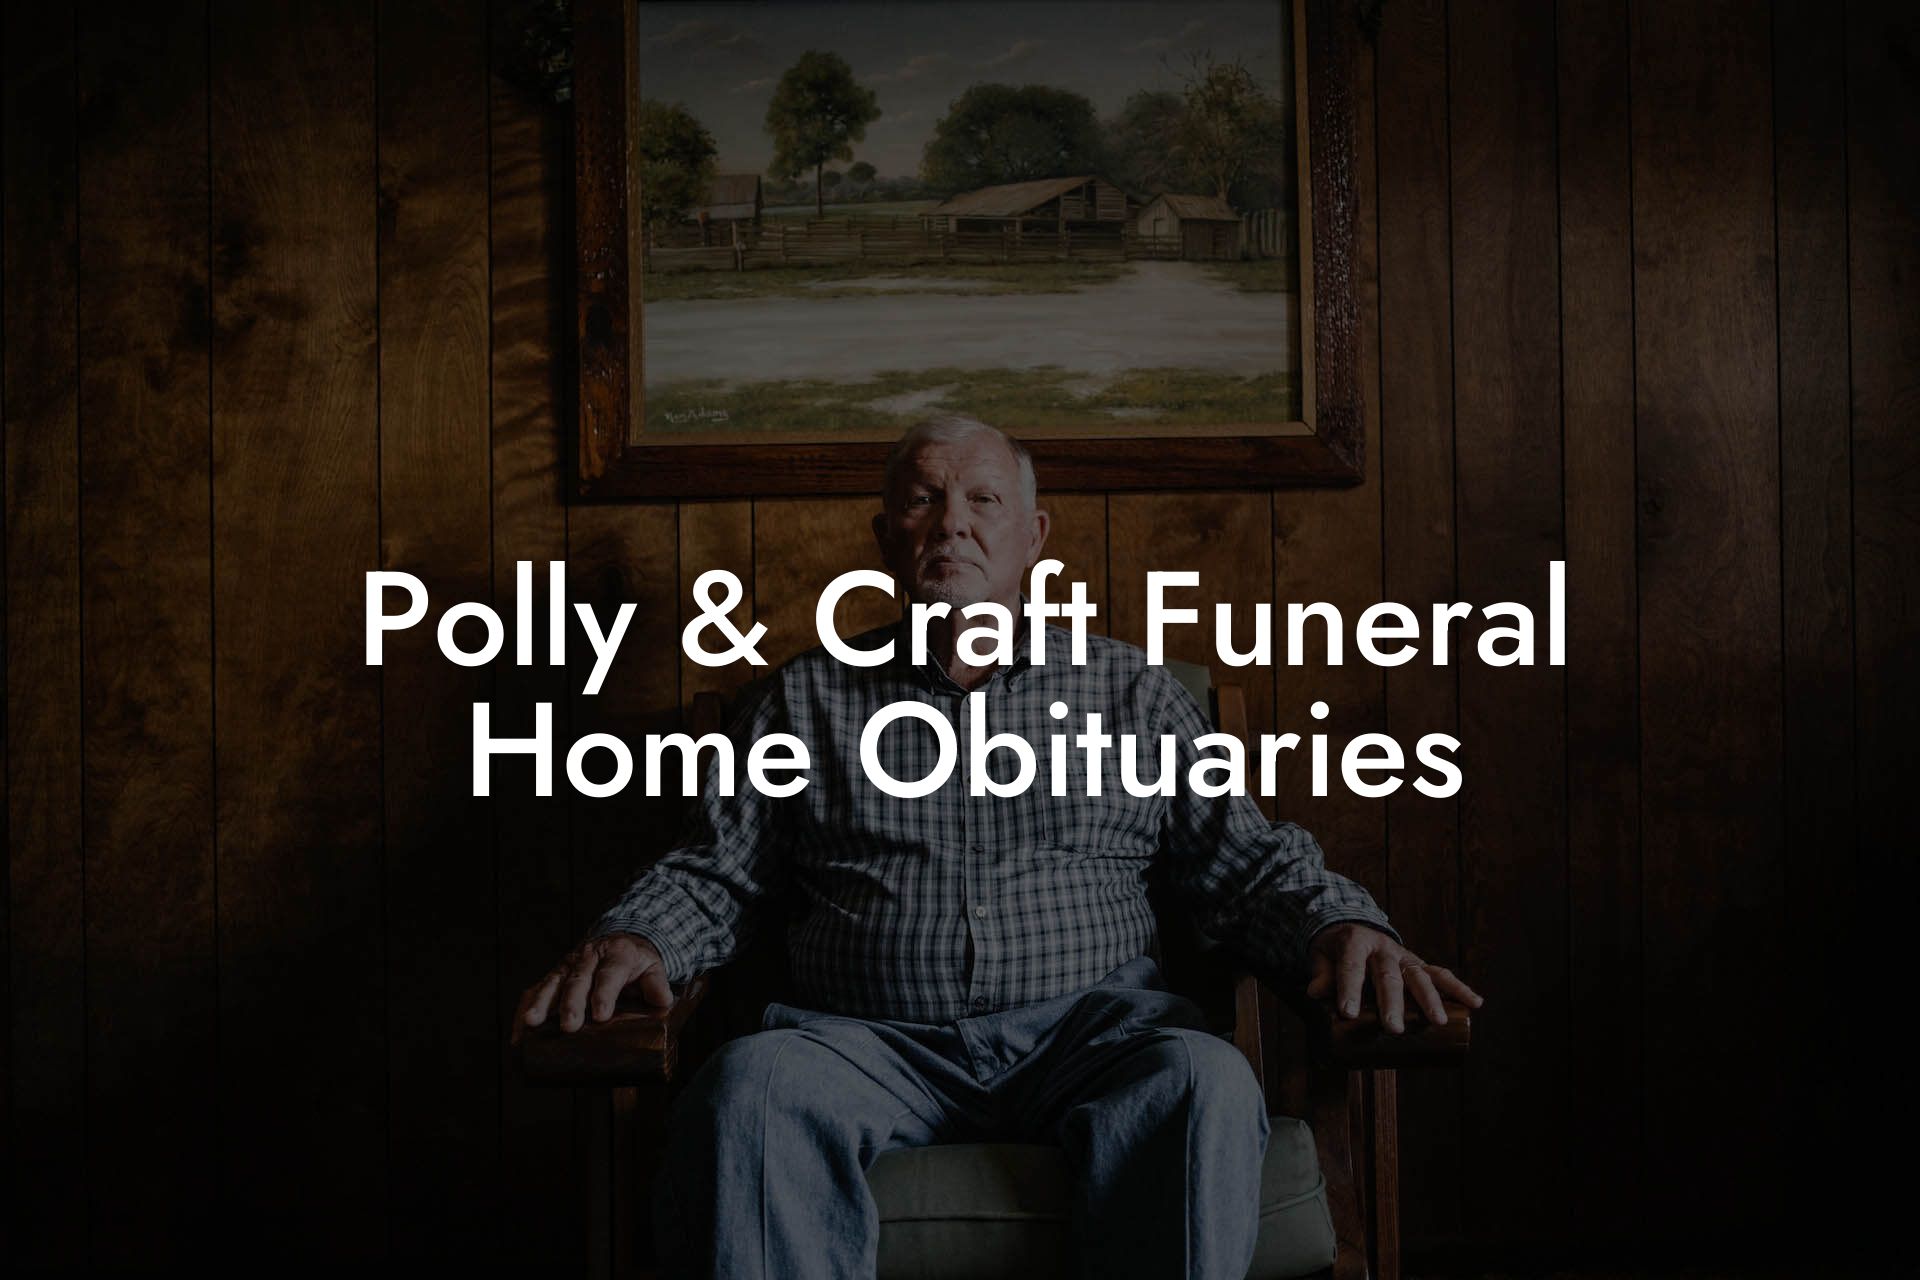 Polly & Craft Funeral Home Obituaries